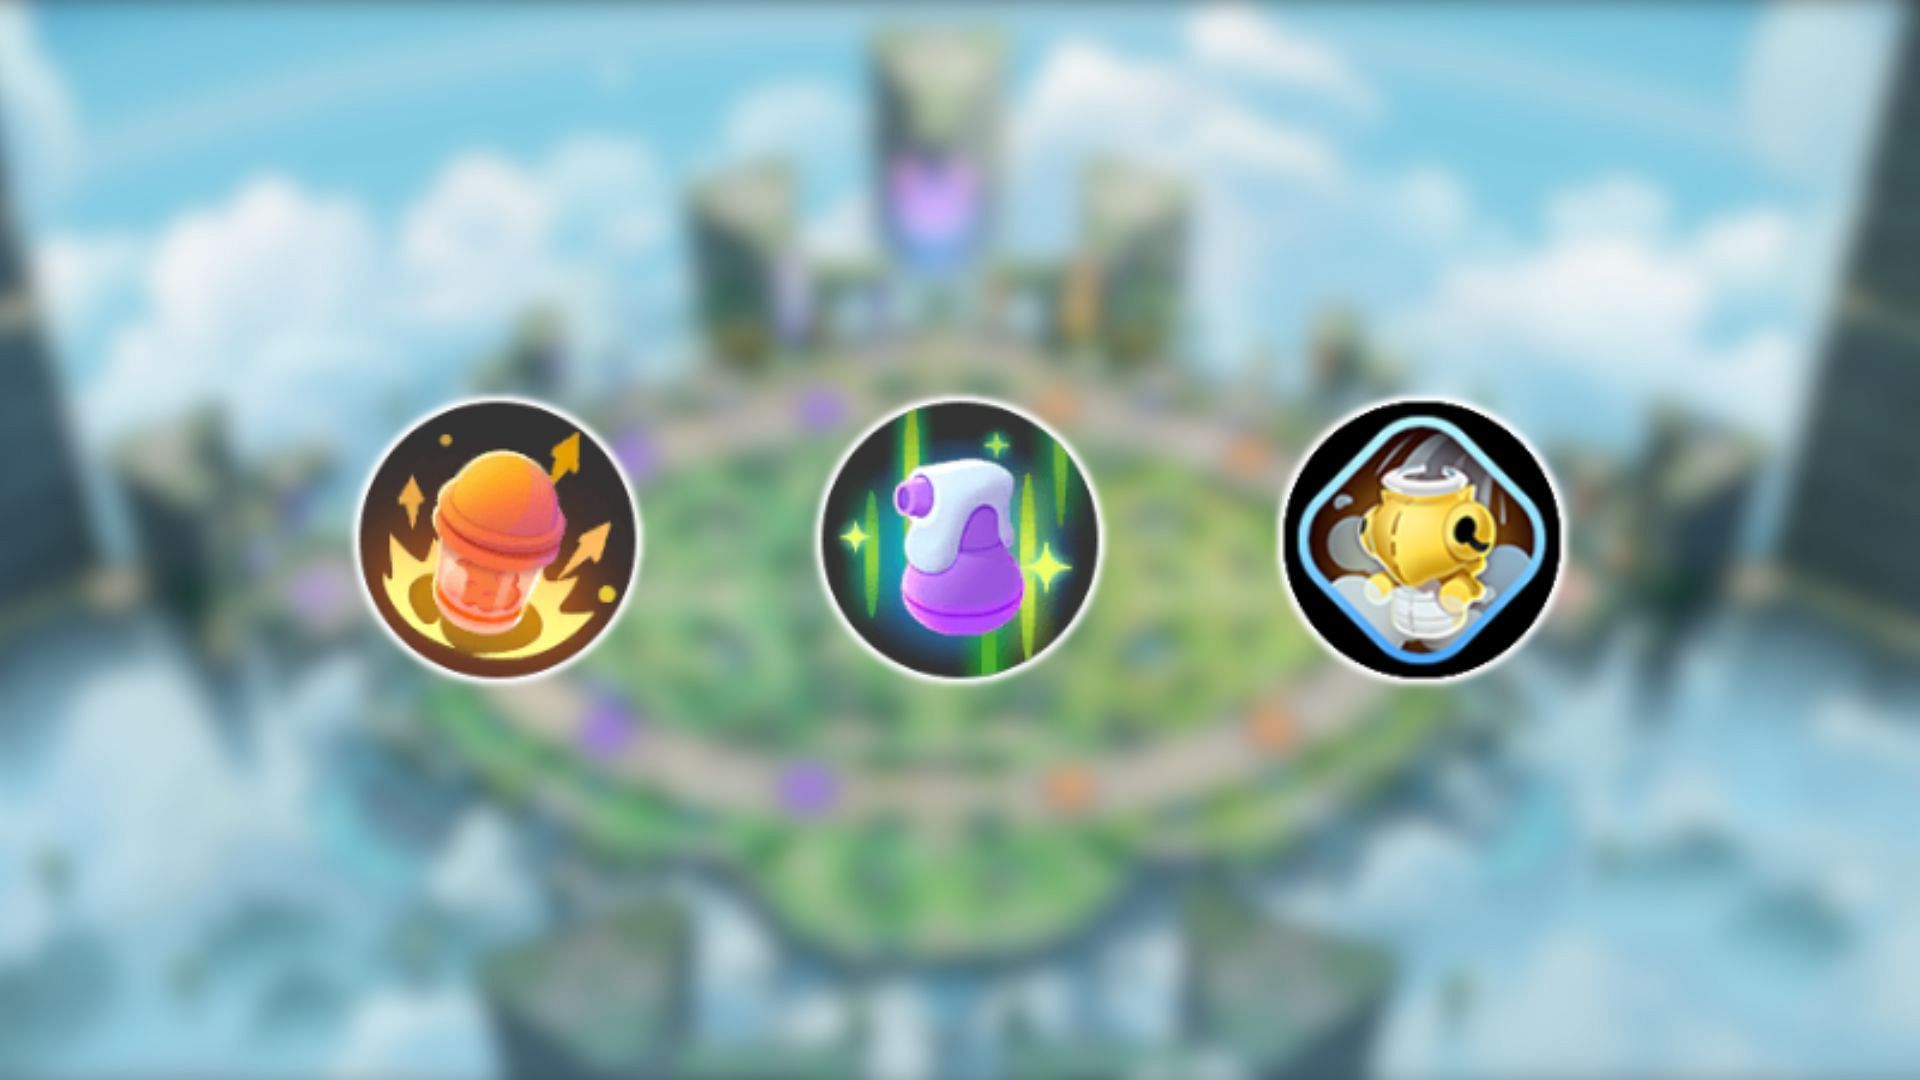 X Attack, Potion, and Shedinja Doll shine brightly in the commendable A tier (Image via The Pokemon Company)